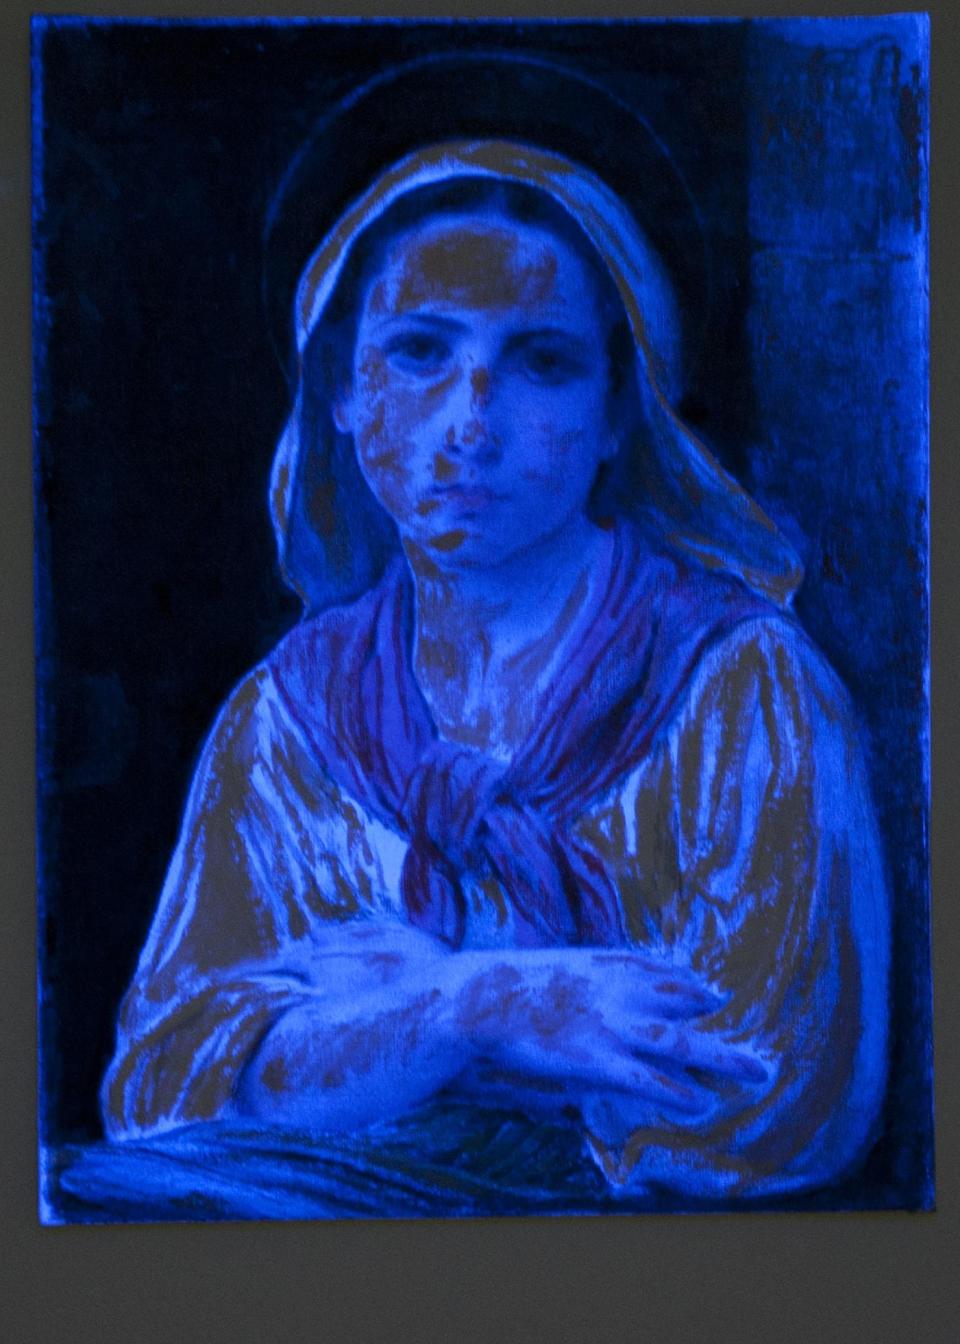 A black light shows the deception behind a forgery by art forger Mark A. Landis, of Laurel, Miss. of an original work by 19th-century French painter William-Adolphe Bouguereau, at the University of Cincinnati in Cincinnati, Ohio on Tuesday, March 27, 2012. The work of the convincing art forger who has spent nearly three decades copying artists like Picasso and donating his fake art to unsuspecting museums goes on display April Fool's Day. The University of Cincinnati exhibit will explore the problem of art forgery through a look at the unusual story of Landis. (AP Photo/Dottie Stover-University of Cincinnati)